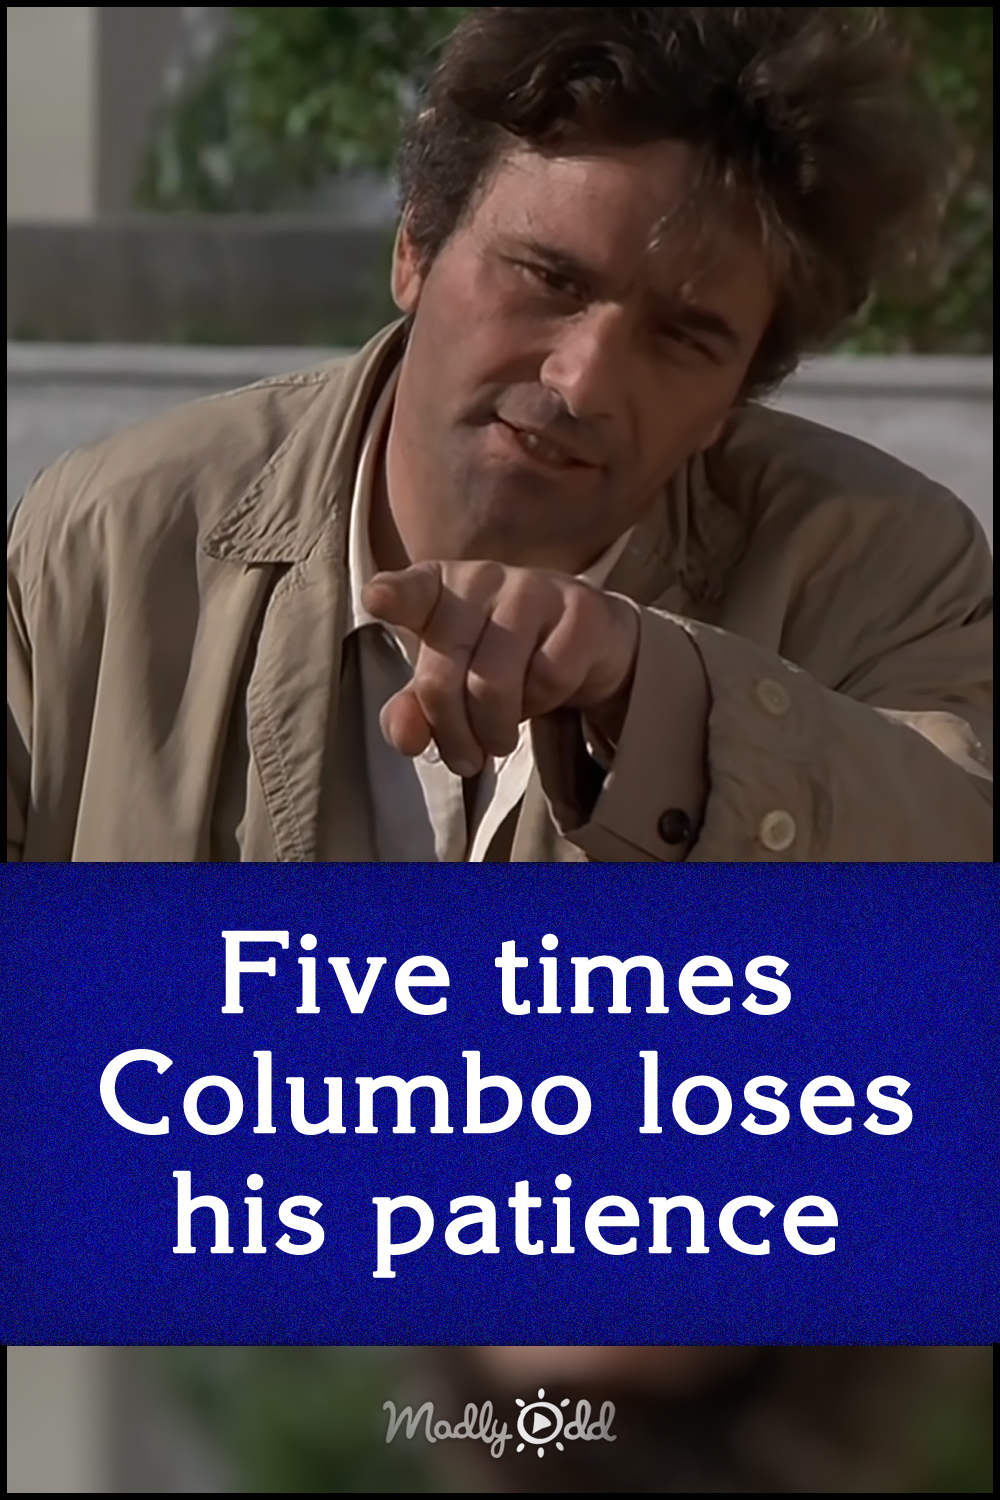 Five times Columbo loses his patience